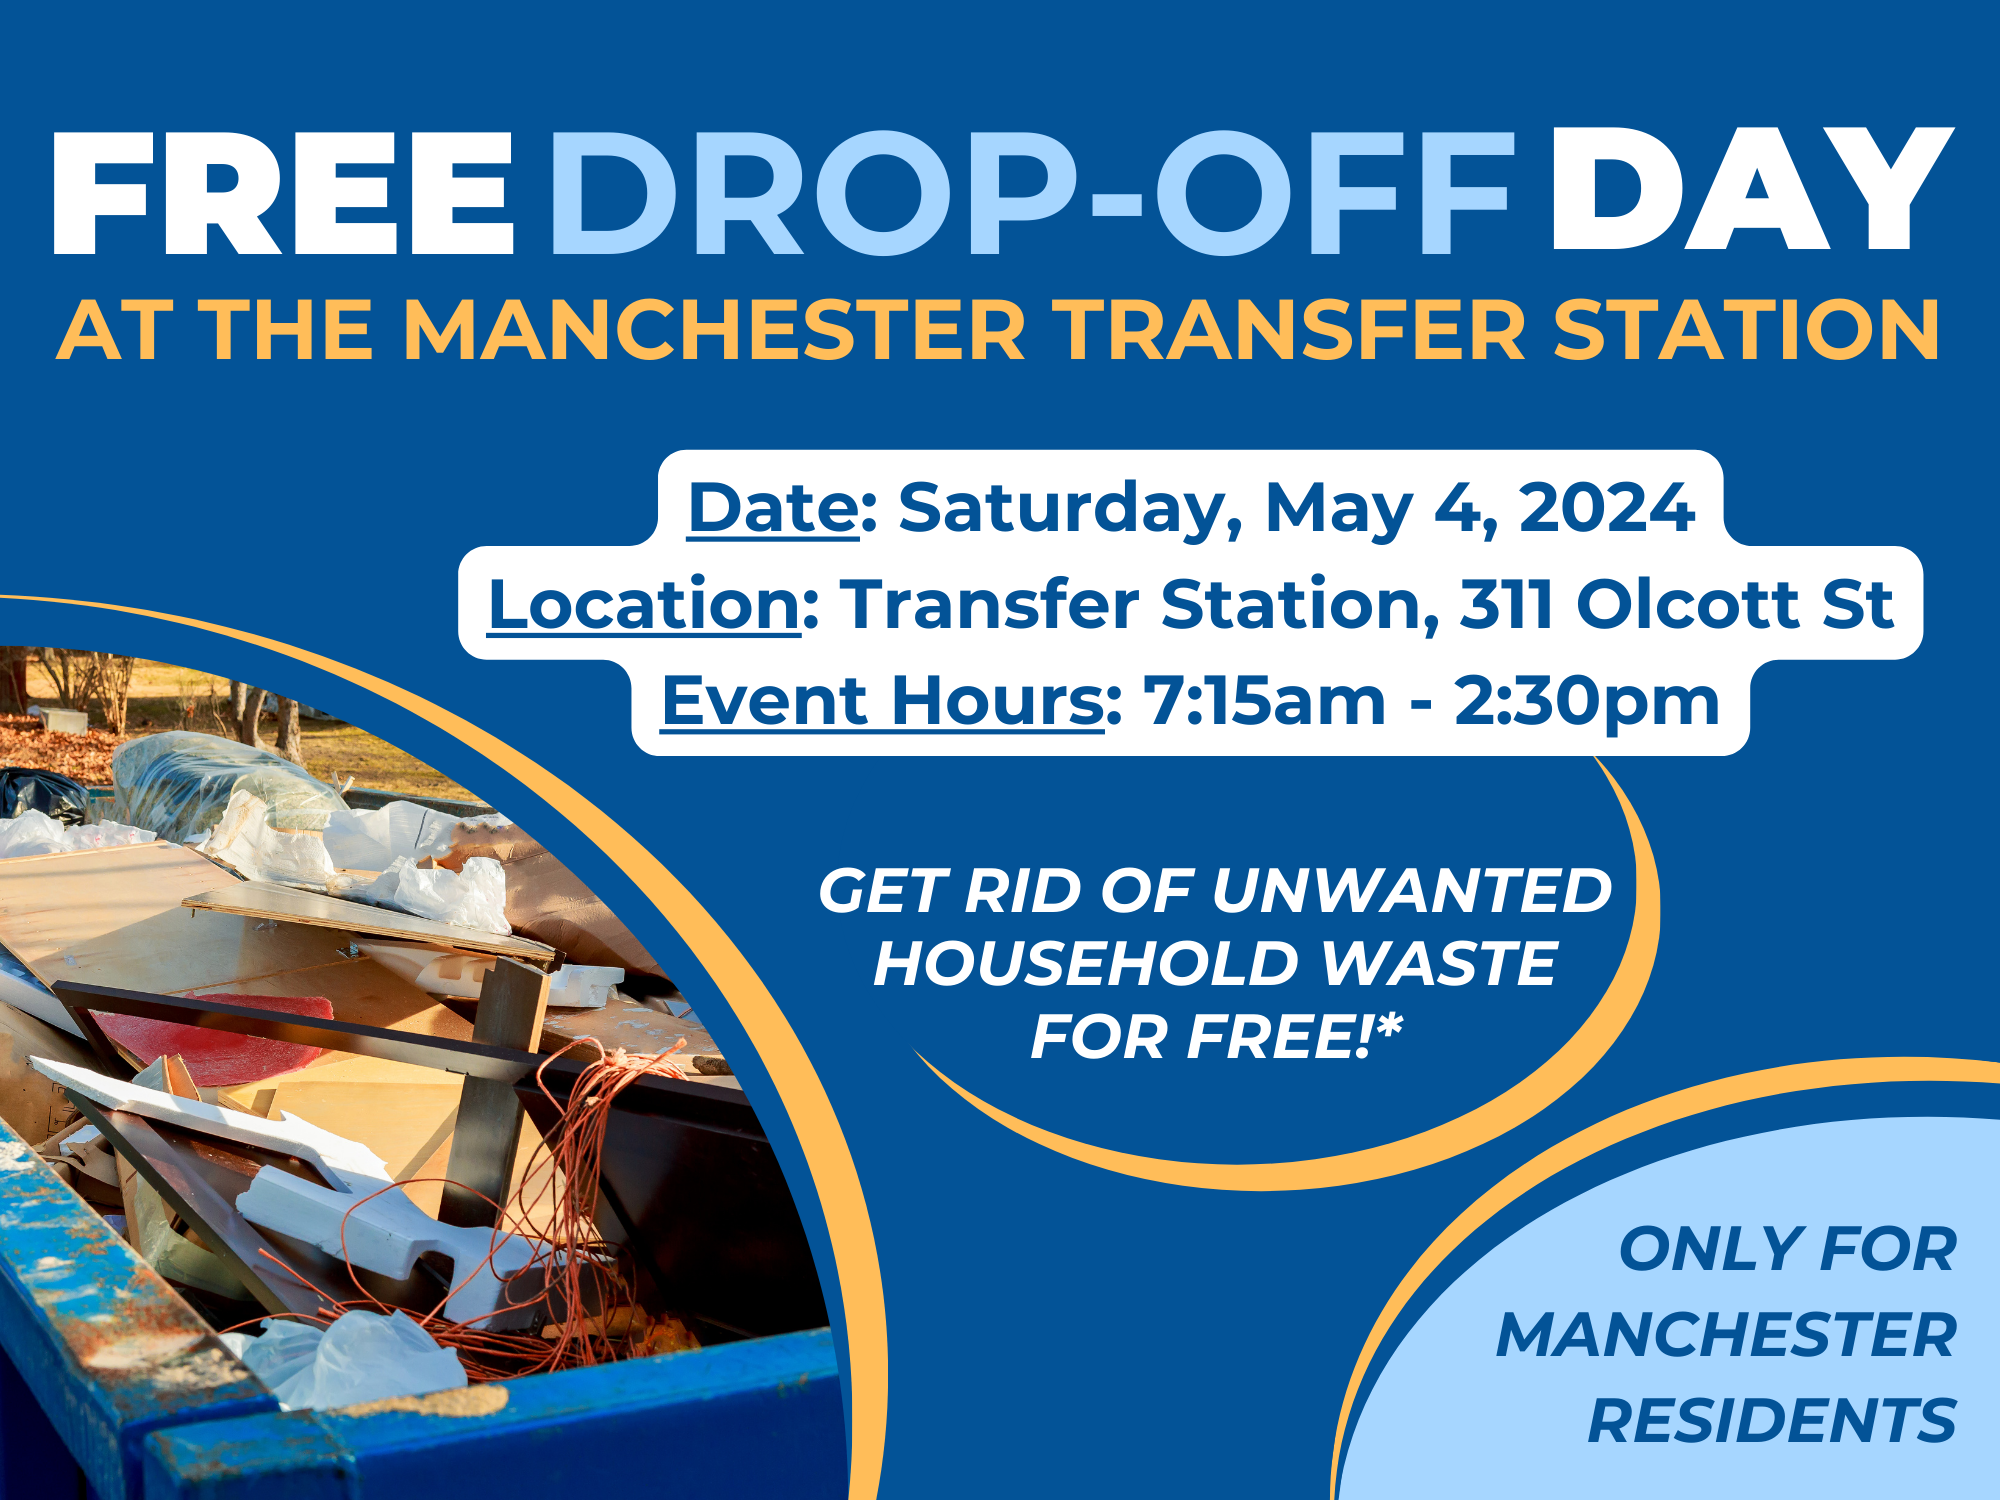 Free Drop-off Day at the Manchester Transfer Station